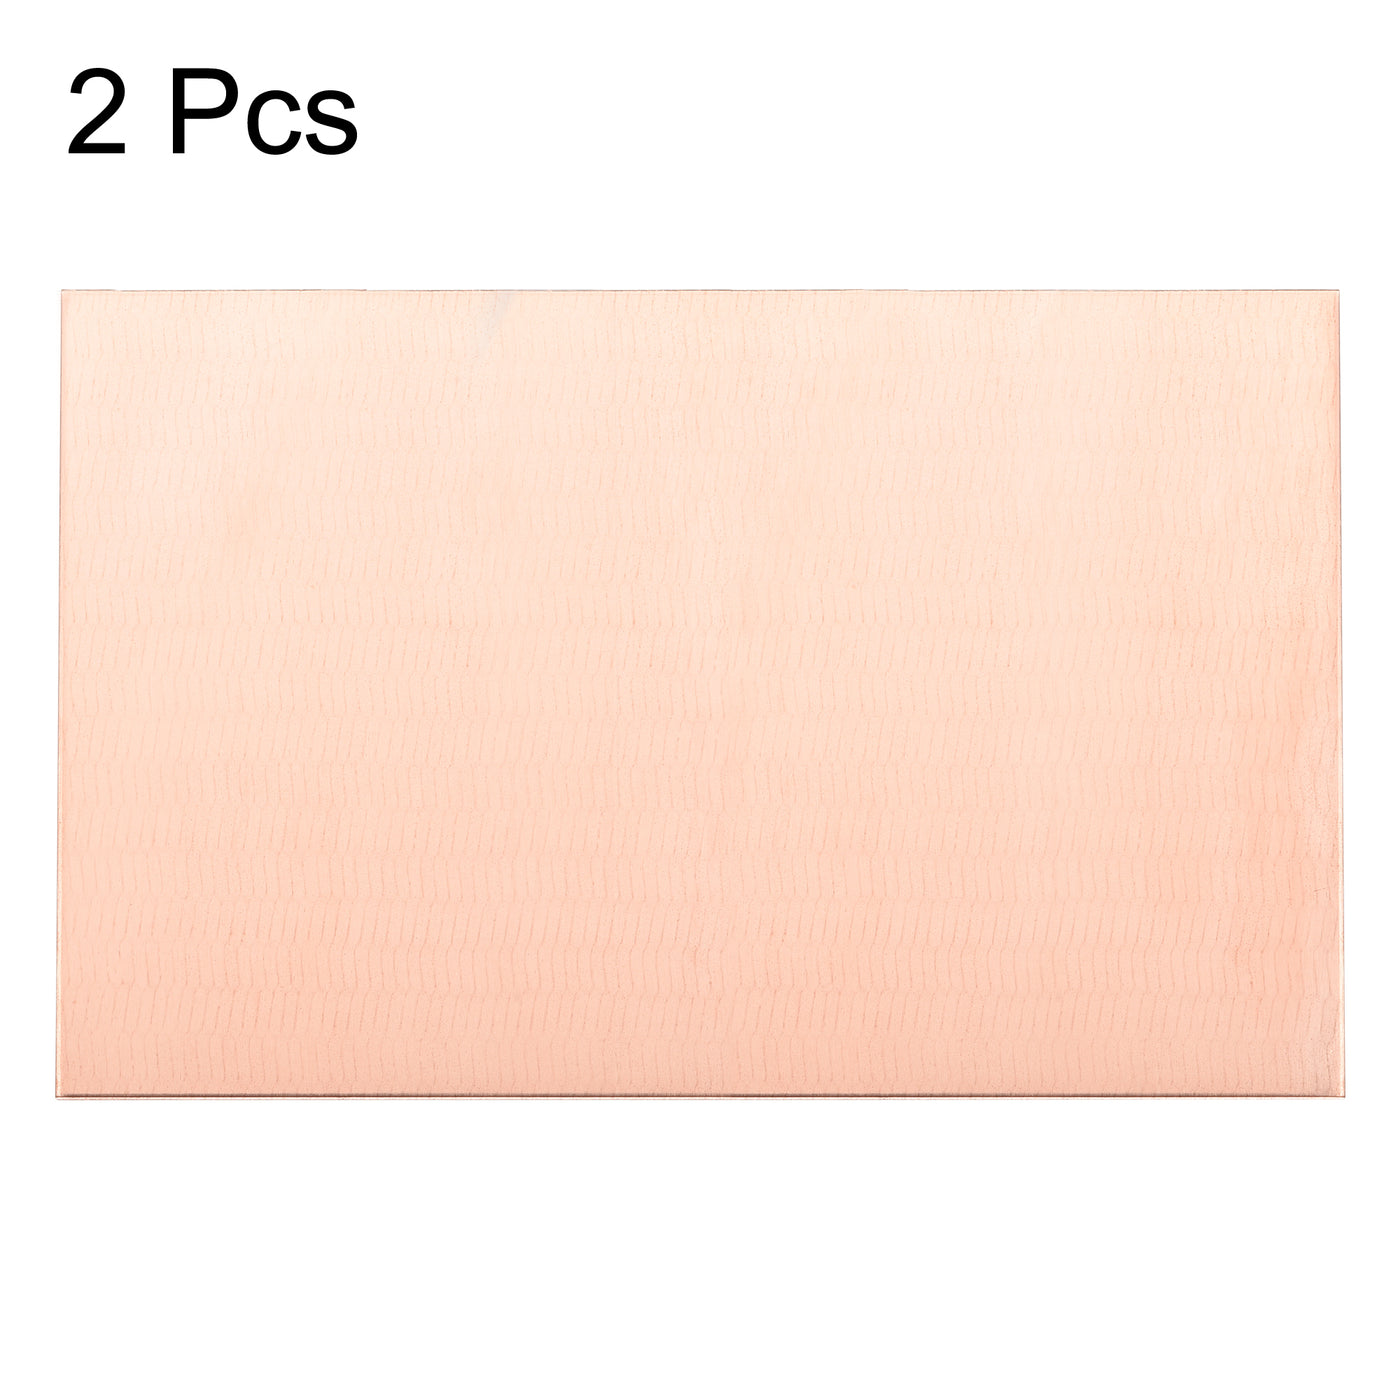 Uxcell Uxcell Copper Sheet, Metal Copper Plates 5.9" Length x 3.9" Width x 0.04" Thick 2pcs